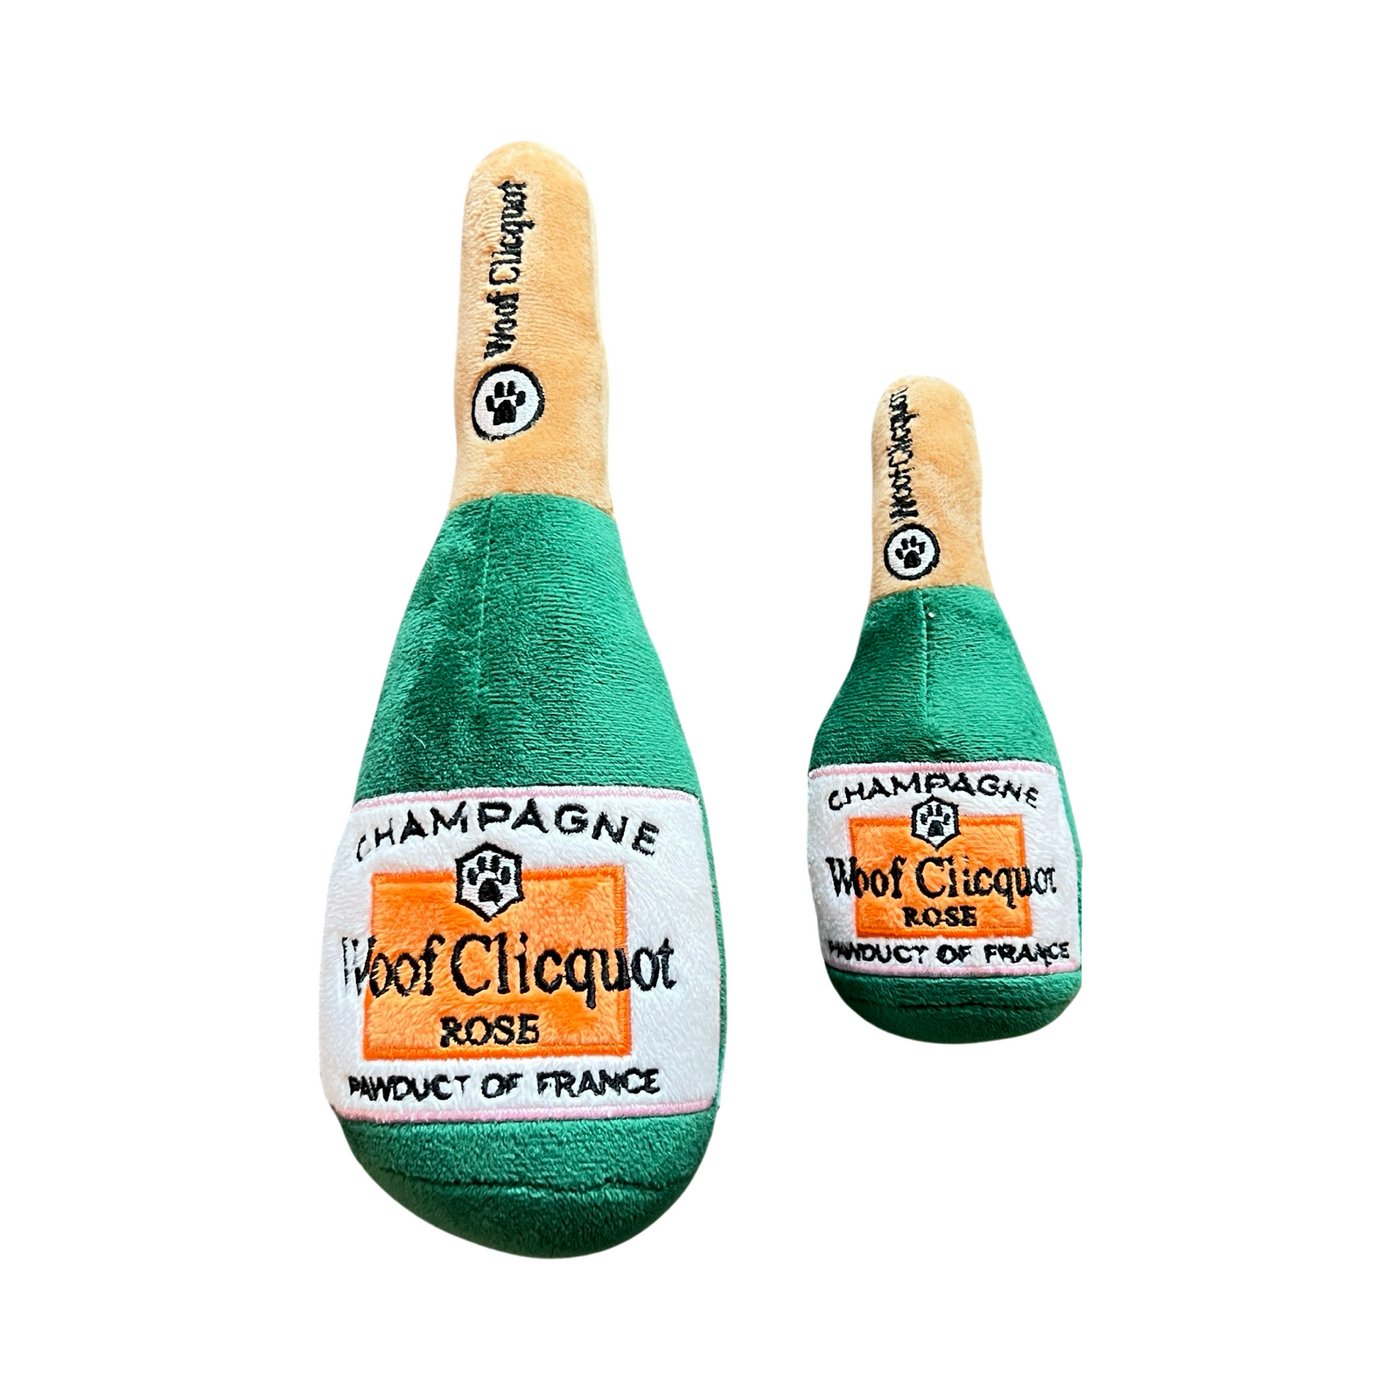 set of two Green plush dog toys, one smaller then the other, in the shape of a champagne bottle featuring a paw print and the phrase Woof Clicquot Rose' Champagne.